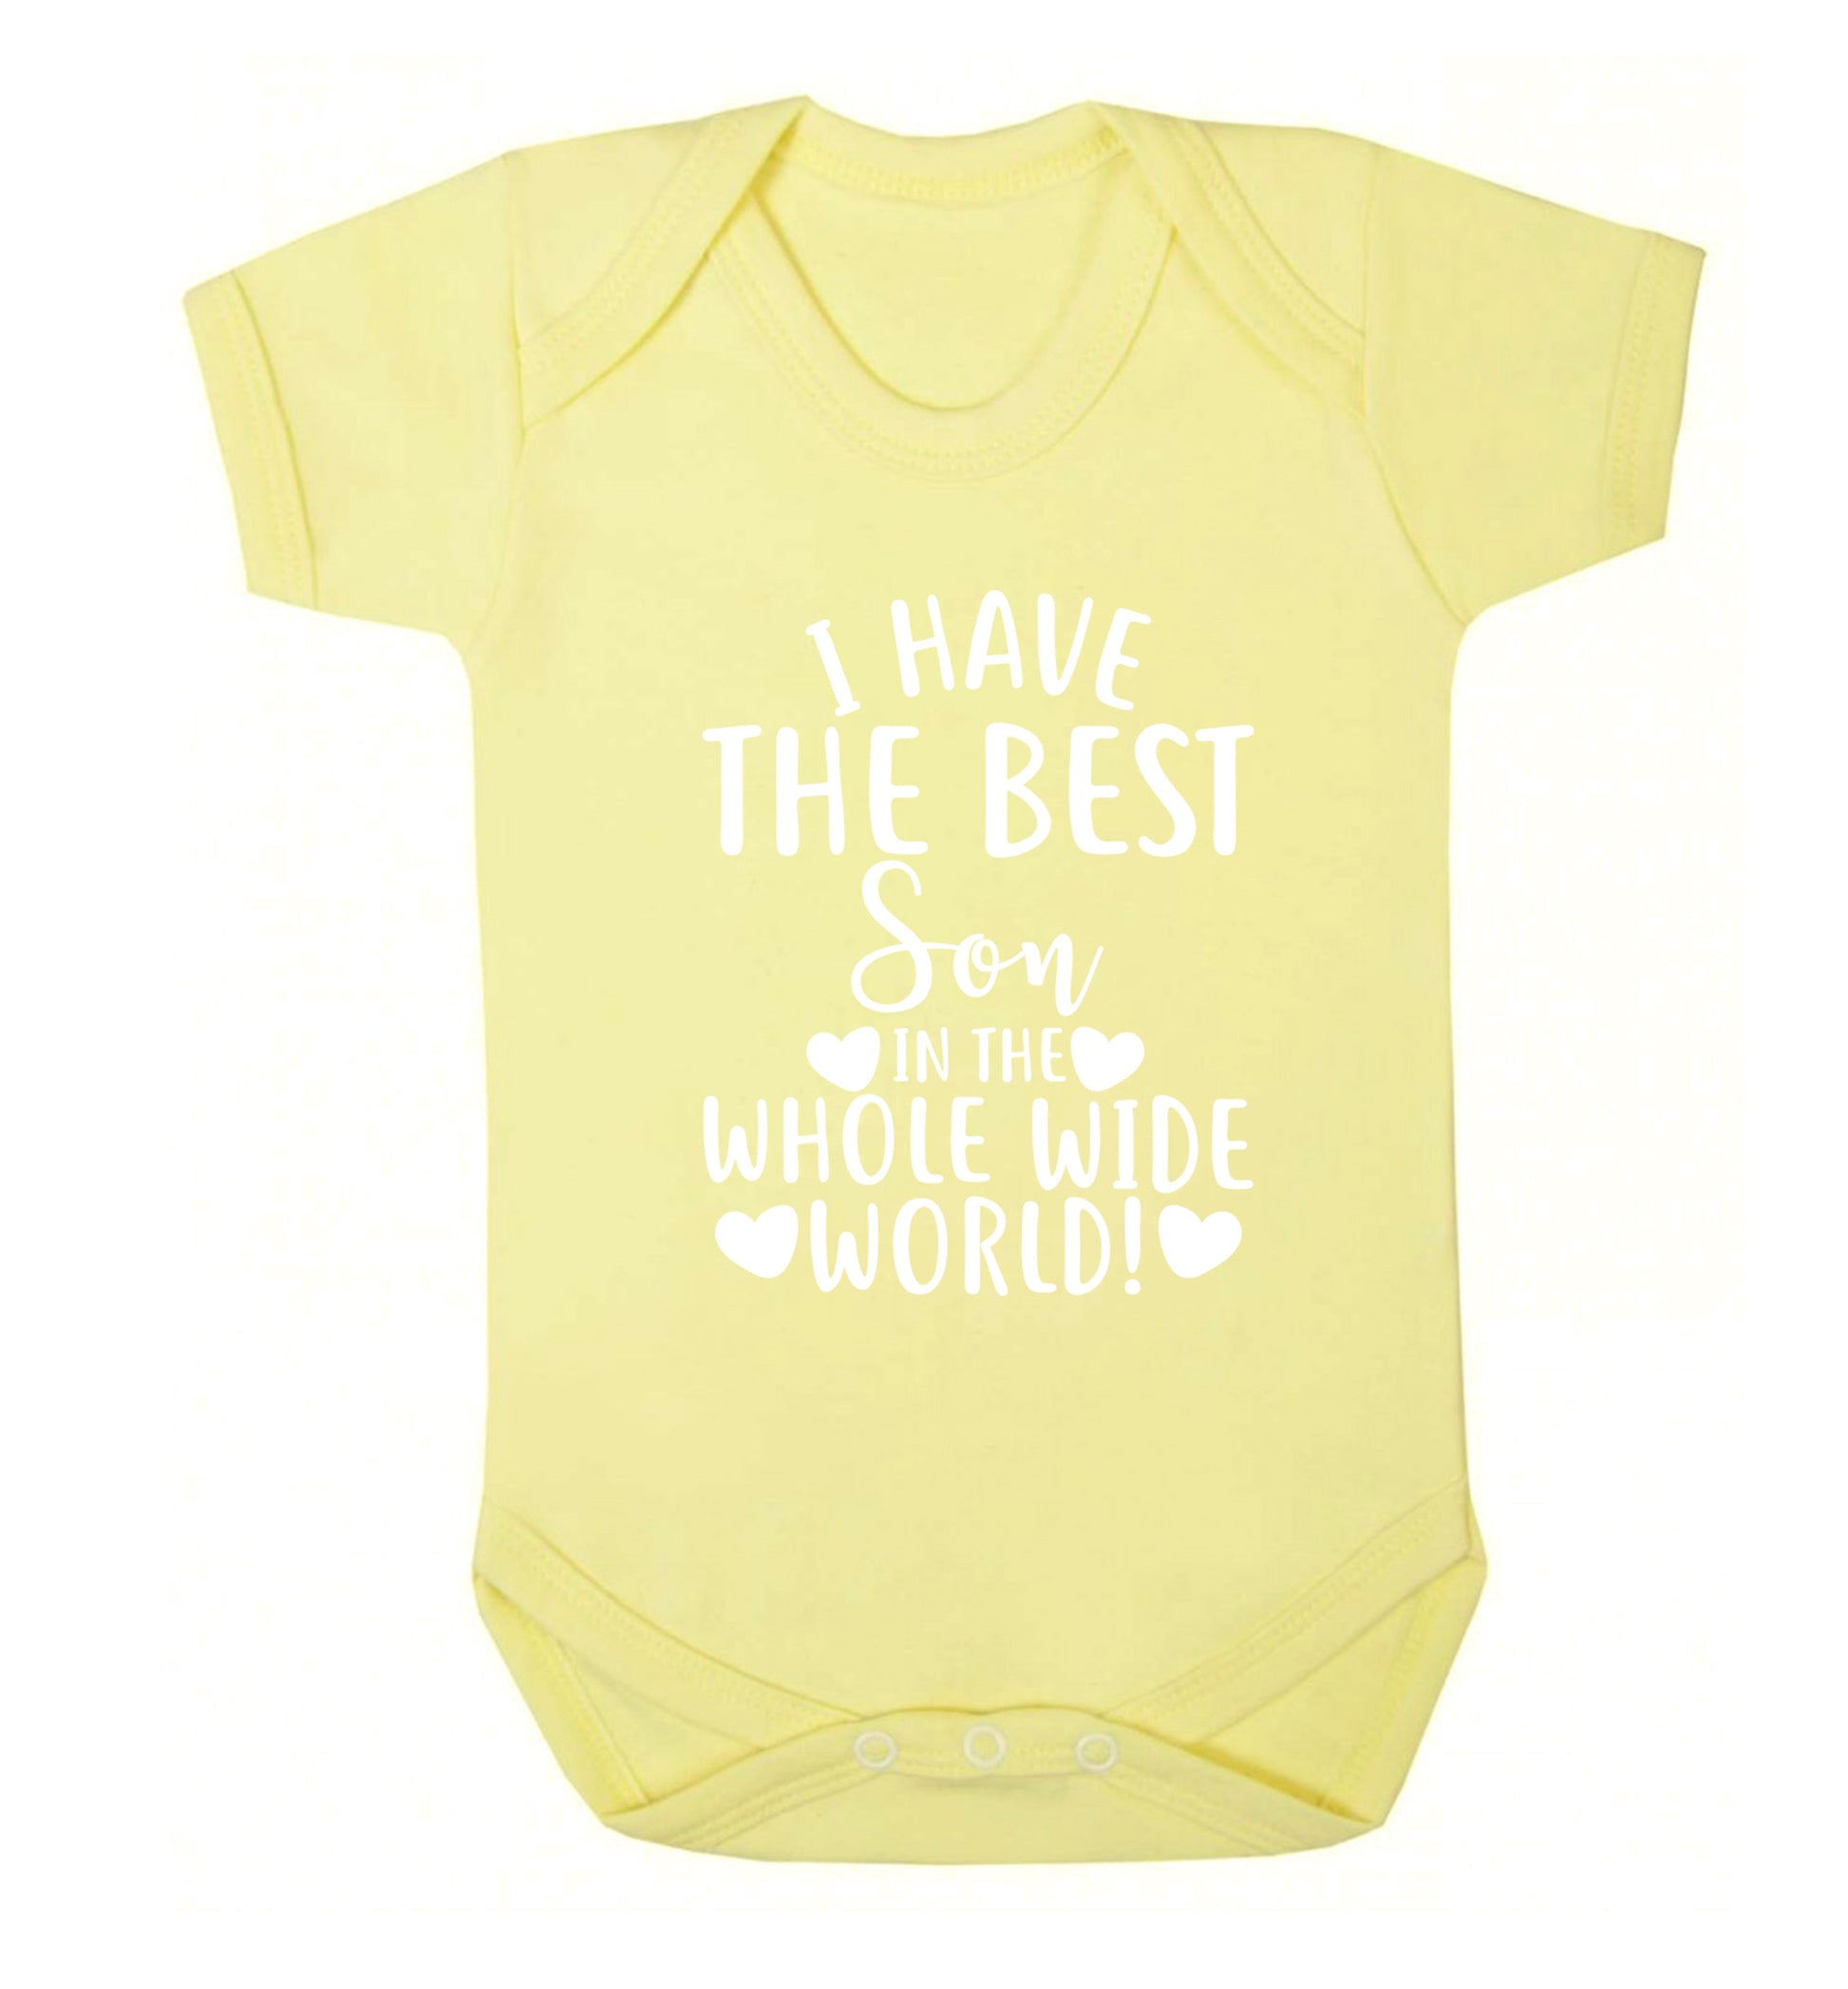 I have the best son in the whole wide world! Baby Vest pale yellow 18-24 months